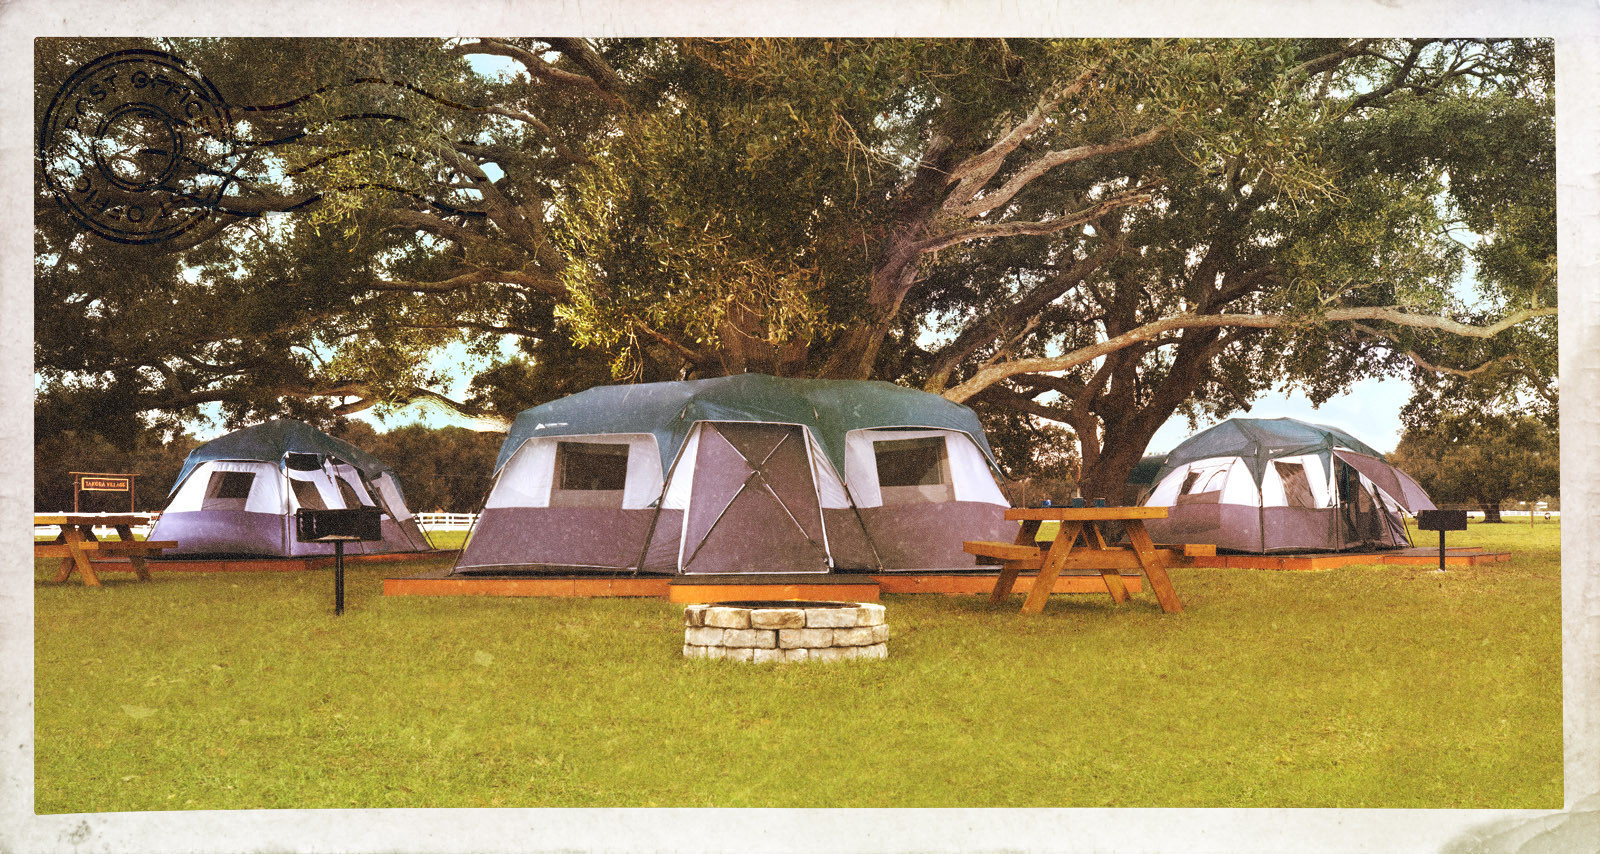 Compare Camping Options at Westgate River Ranch!